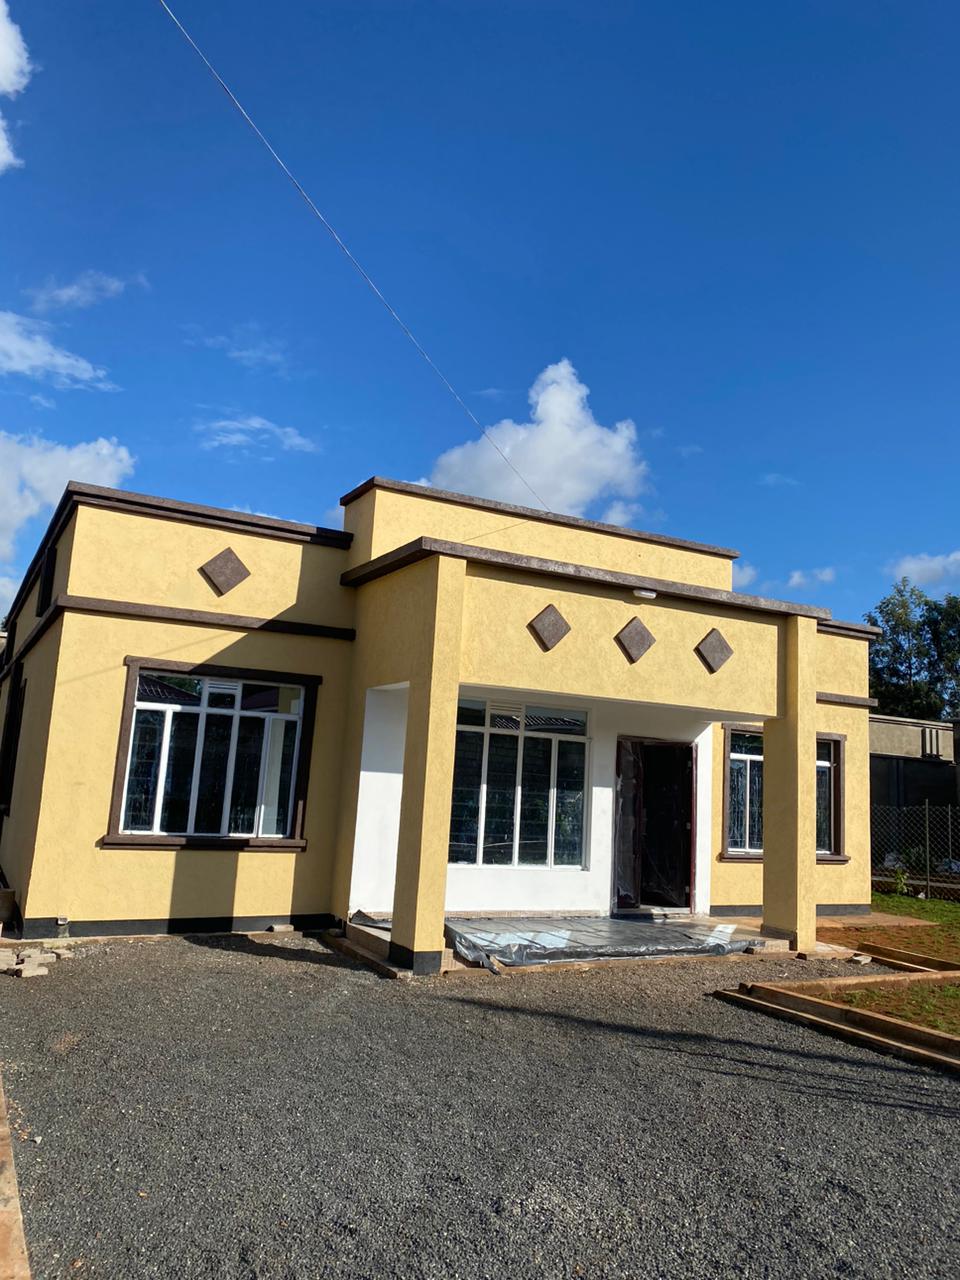 Affordable 3 bedroom bungalow in a gated community for SALE in Kenyatta Road. Sitted on a 50 by 80. Ready title. Asking price Kshs 6.5M Musilli Homes